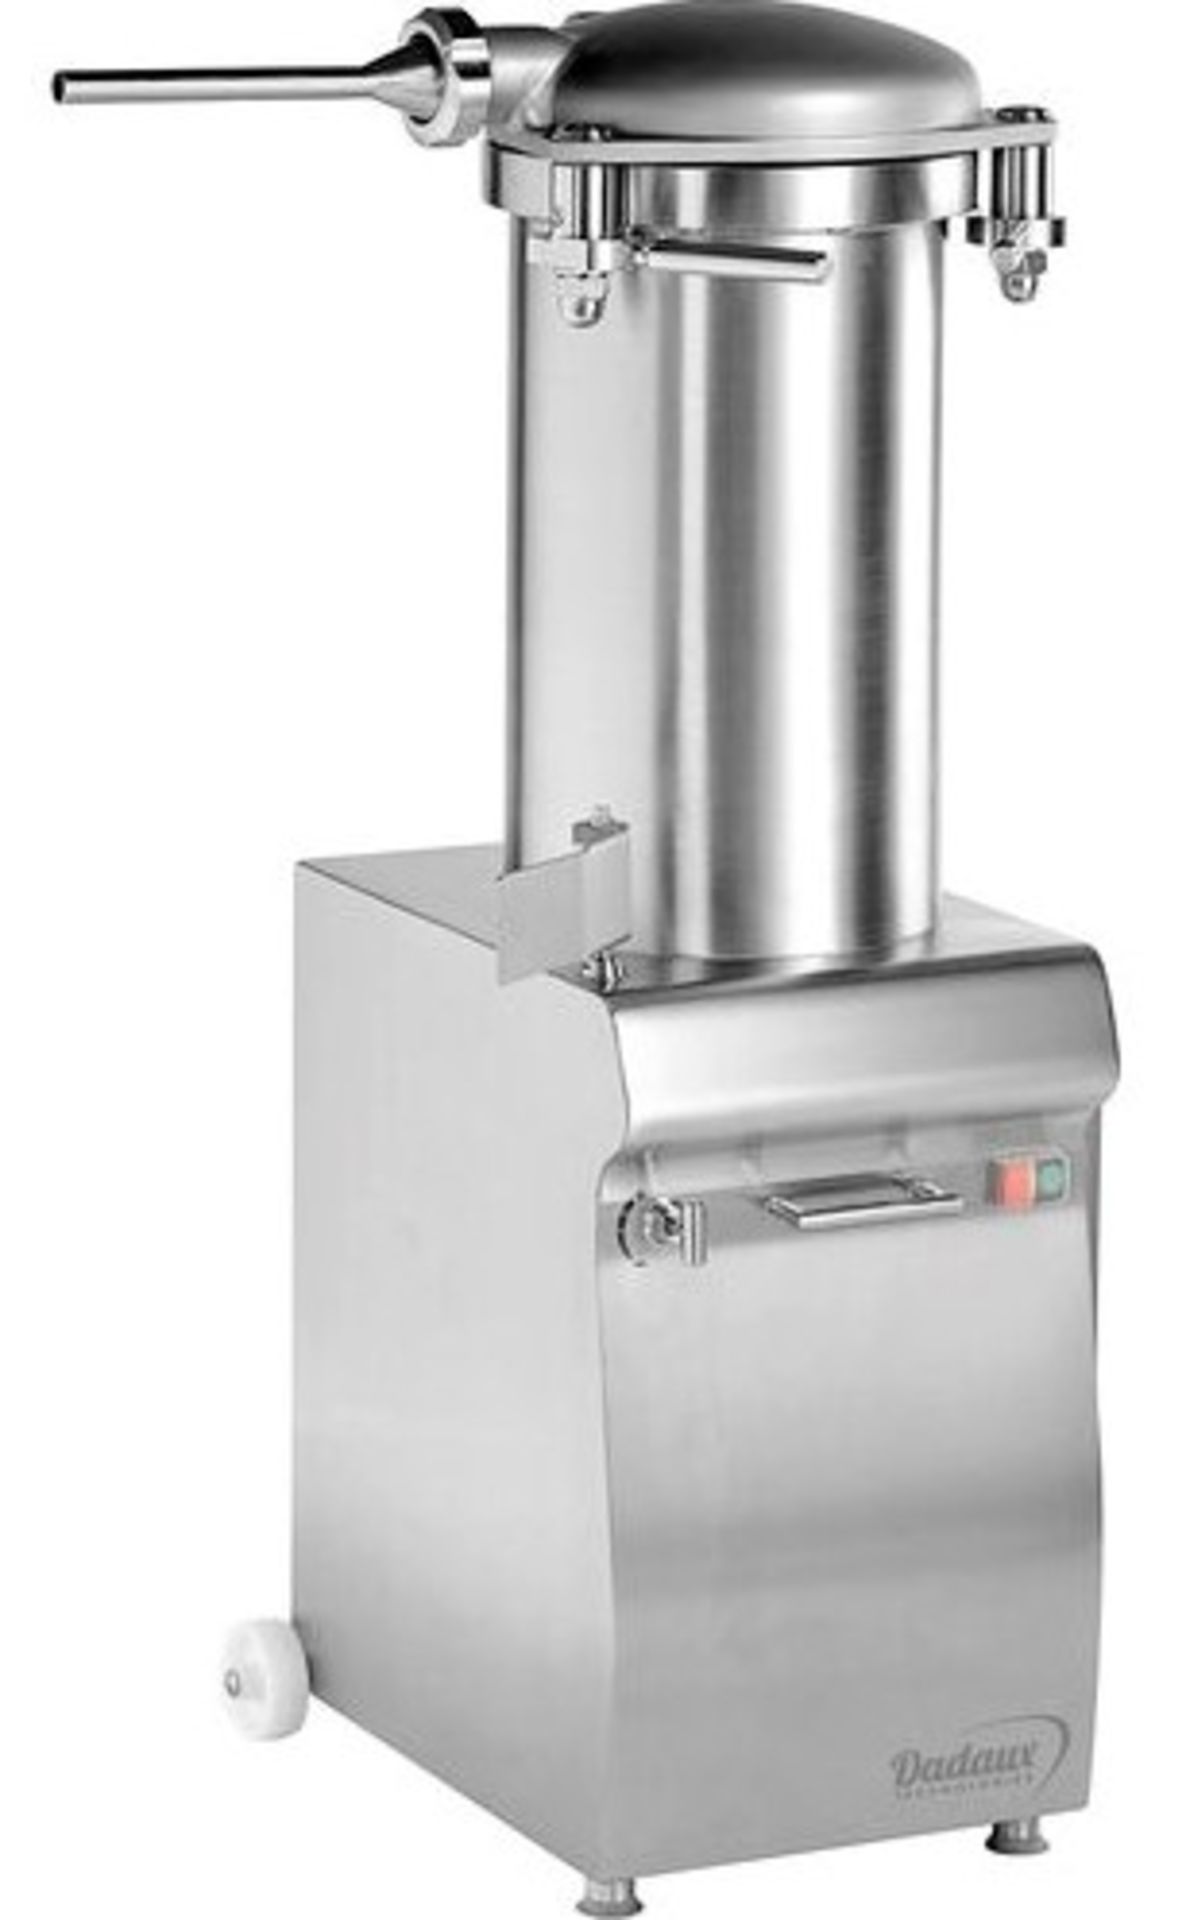 1 x Dadaux PHX25 Hydraulic Sausage Filler / Stuffer - Single Phase - Stainless Steel - RRP £4,900